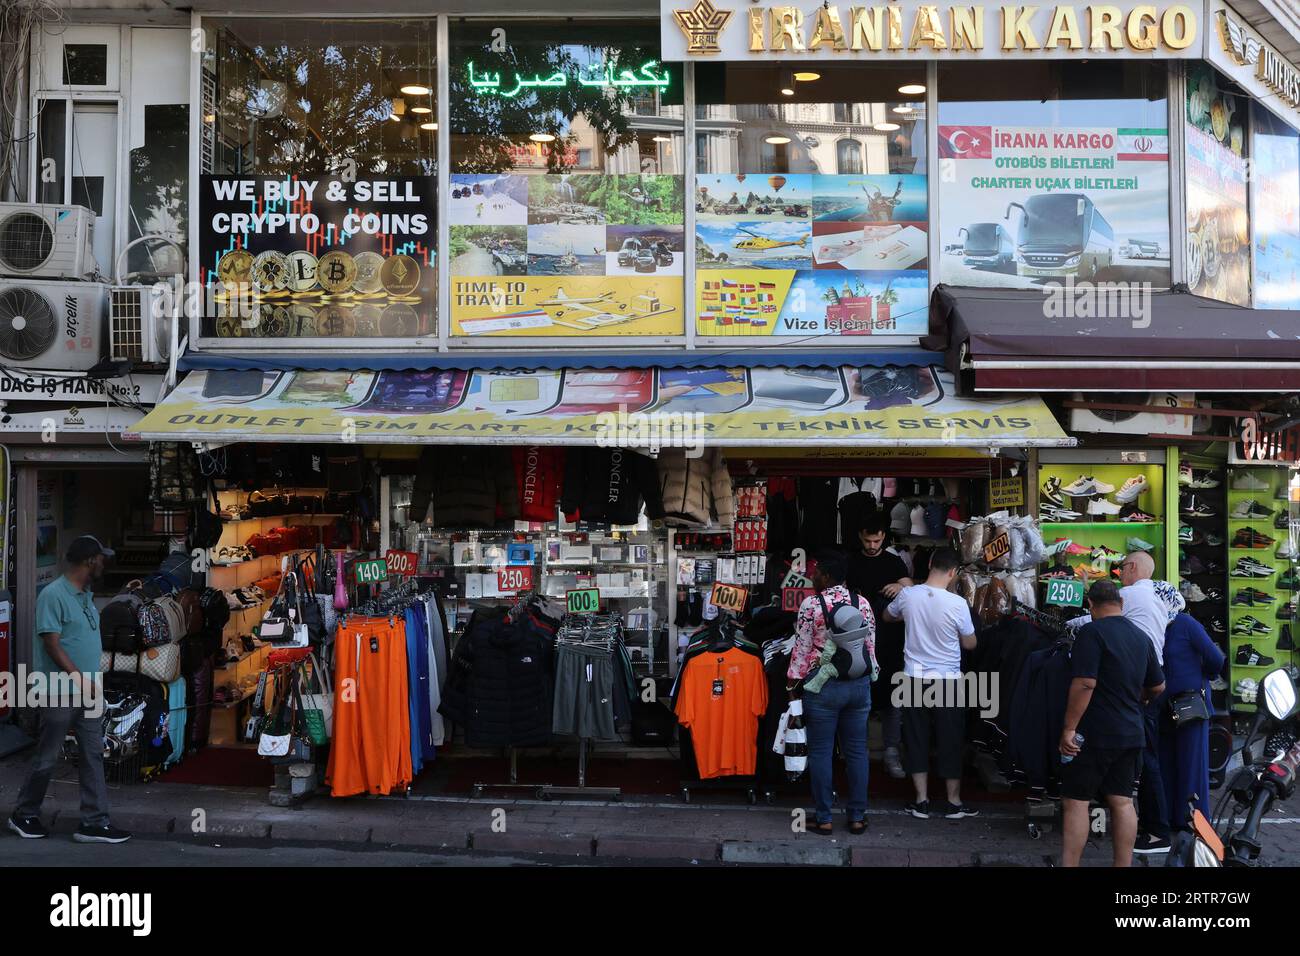 A clothes shop on Divan Yolu Cd. offering to buy Crypto coins, in Istanbul, Turkey Stock Photo